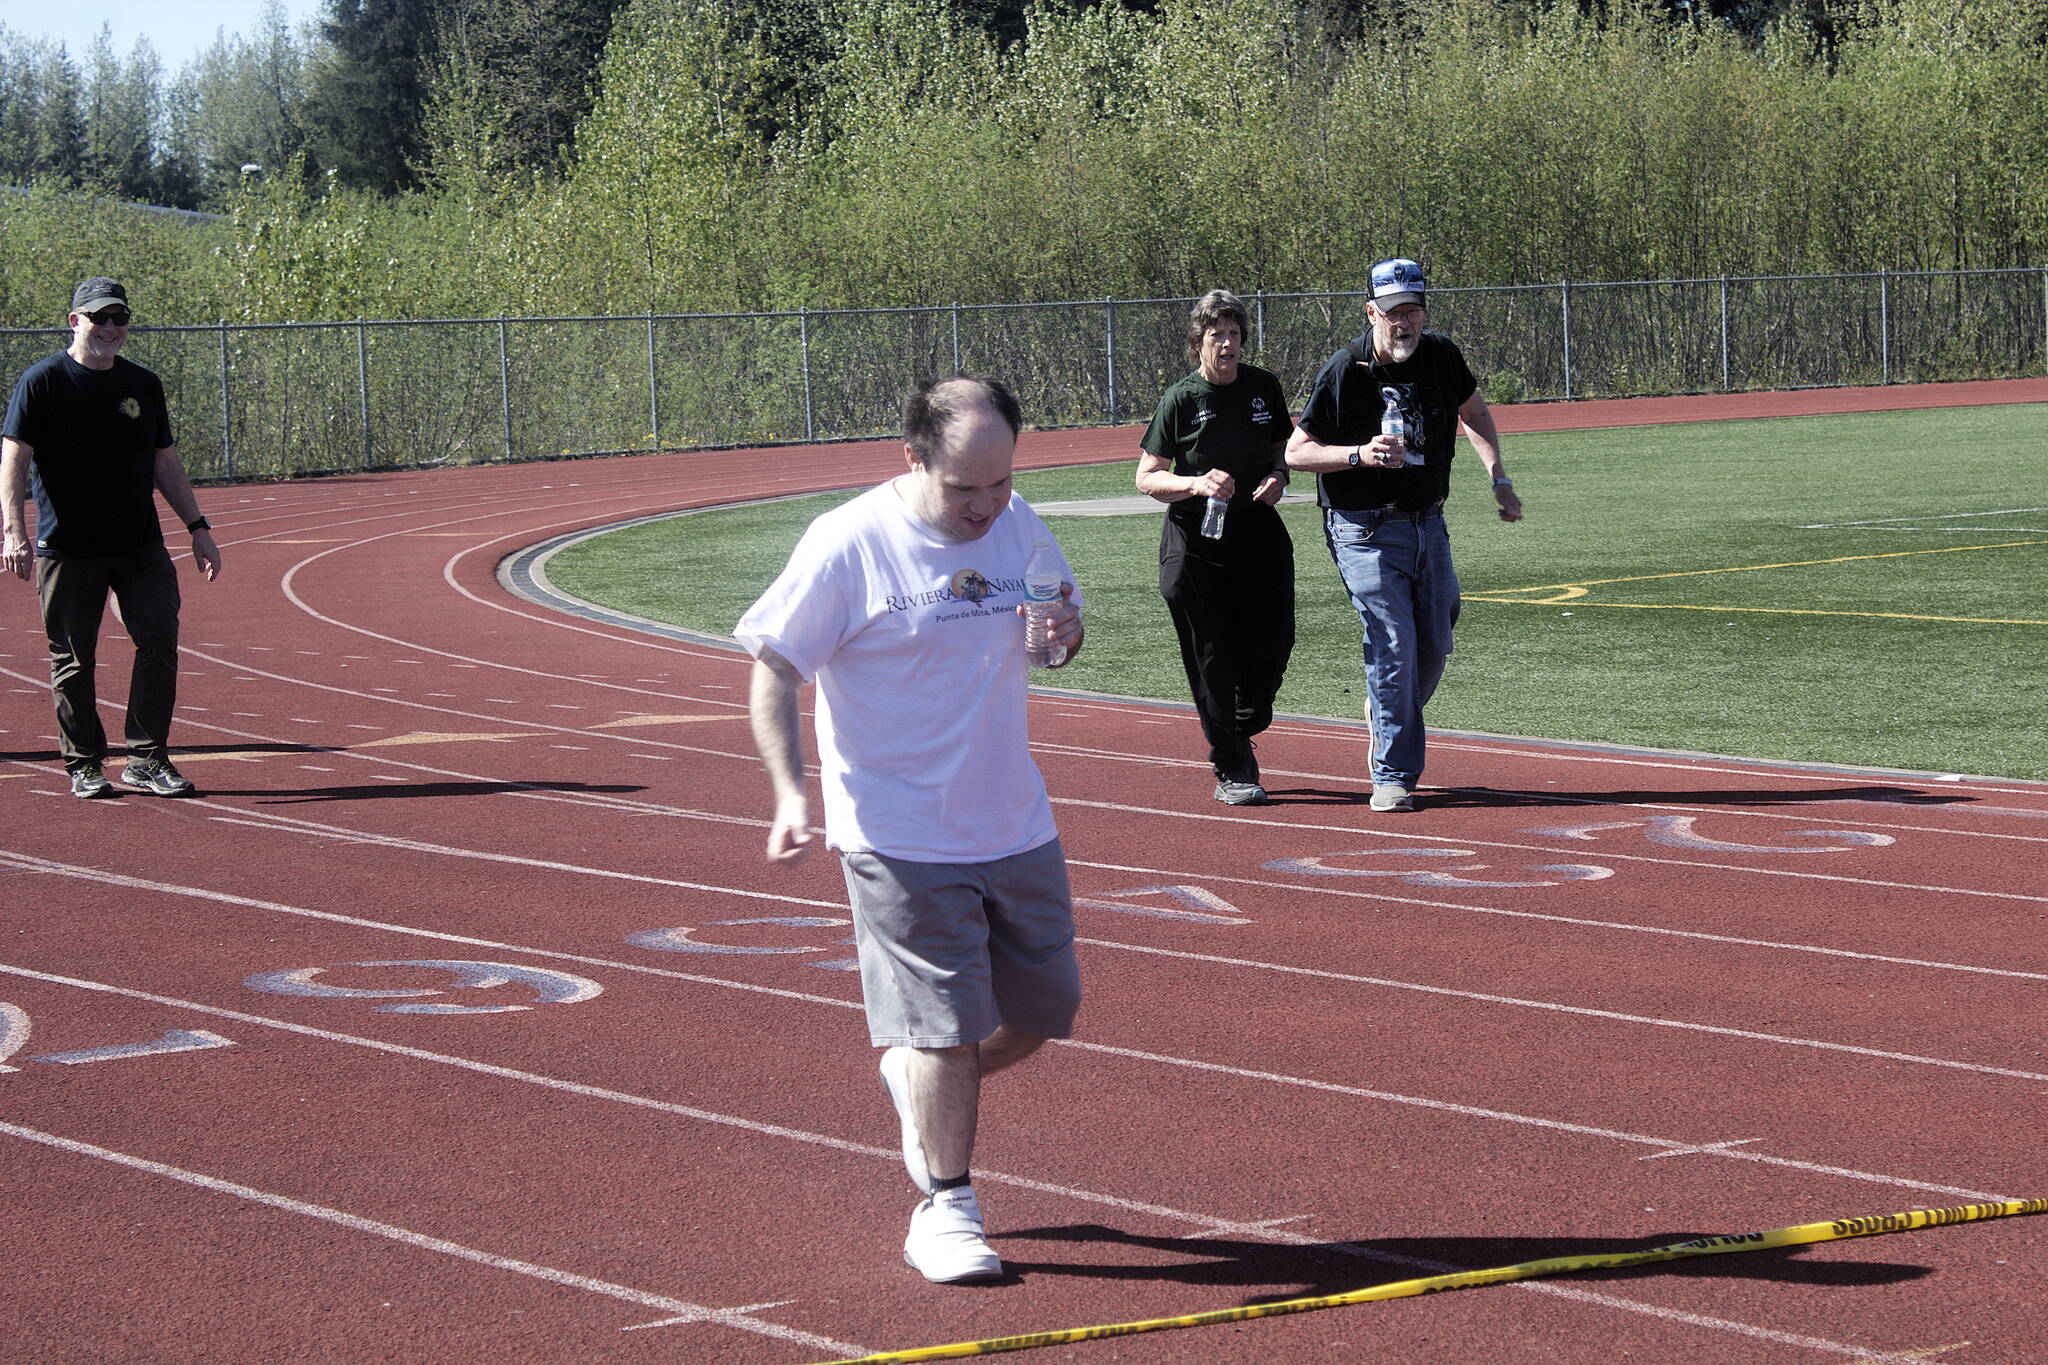 Andreas Jones crosses the finish line during the annual Alaska Law Enforcement Torch Run at Thunder Mountain High School on Saturday morning. Nine disabled athletes and about 20 others participated in the race in Juneau, one of 15 communities statewide raising money for Special Olympics Alaska as part of the event. (Mark Sabbatini / Juneau Empire)